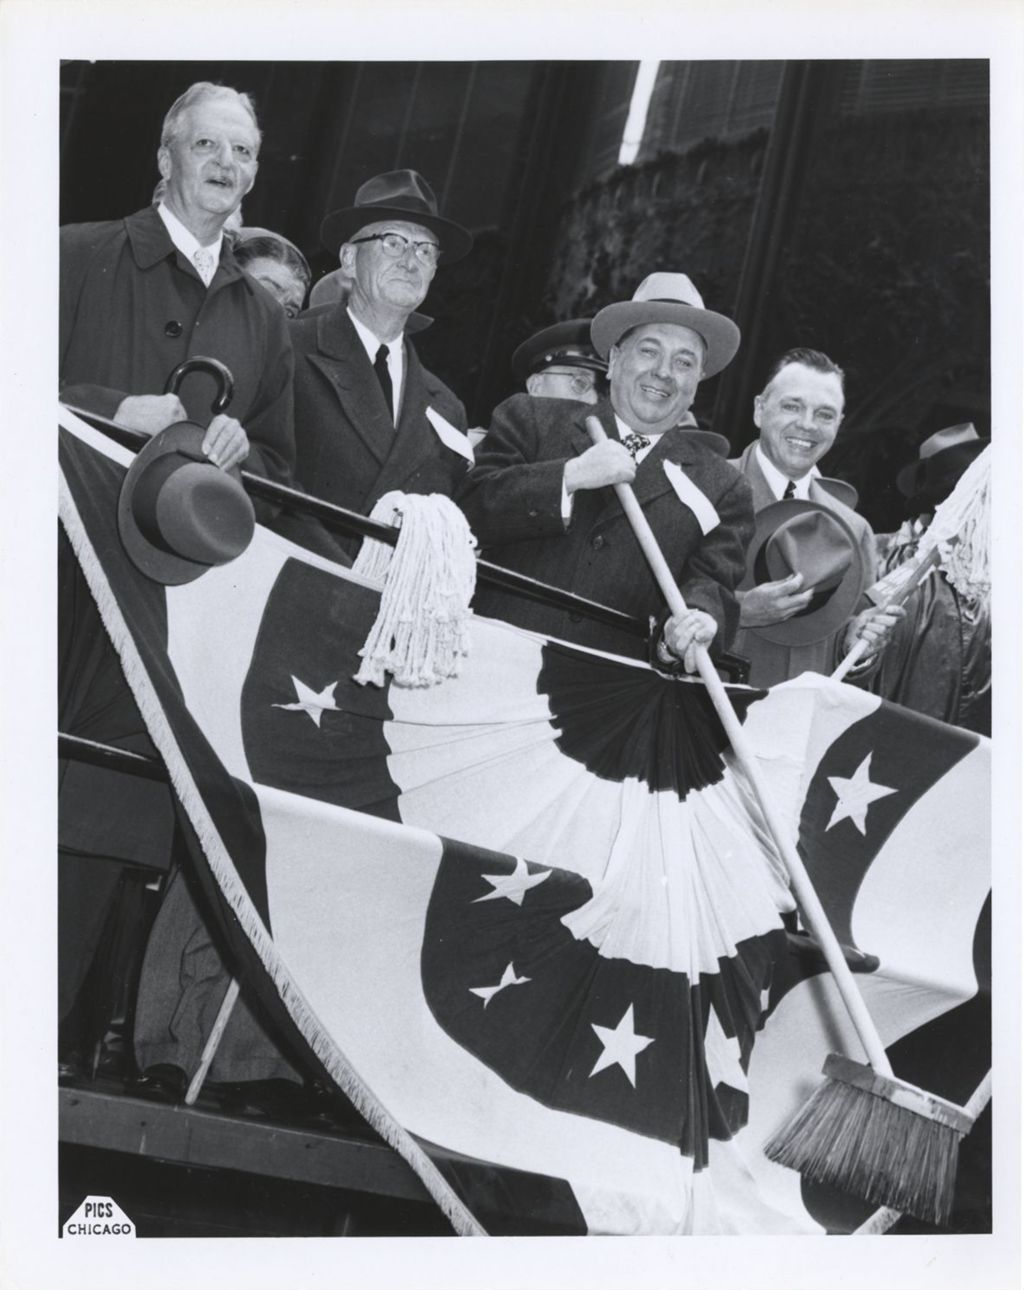 Richard J. Daley with broom on parade viewing stand